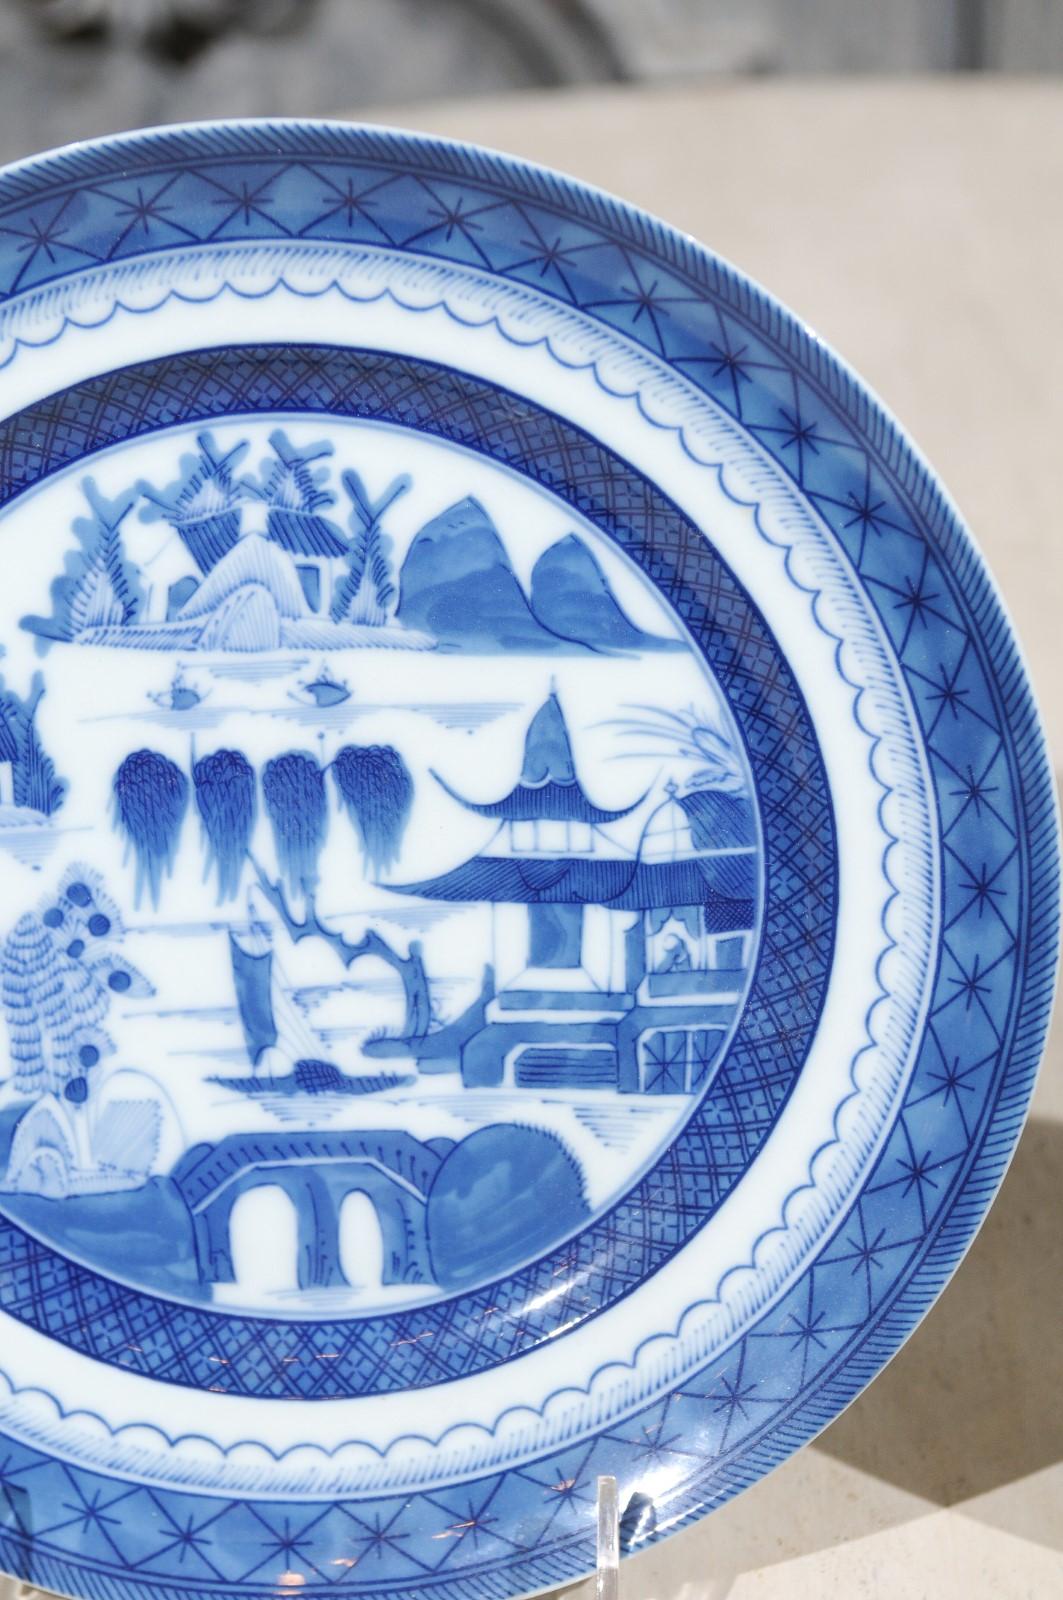 A set of two American Mottahedeh Blue Canton China plates with landscape scenes and latticed border, produced in Portugal. Presenting a charming blue and white decor featuring lovely Chinoiserie landscapes and architectures, each of these two plates